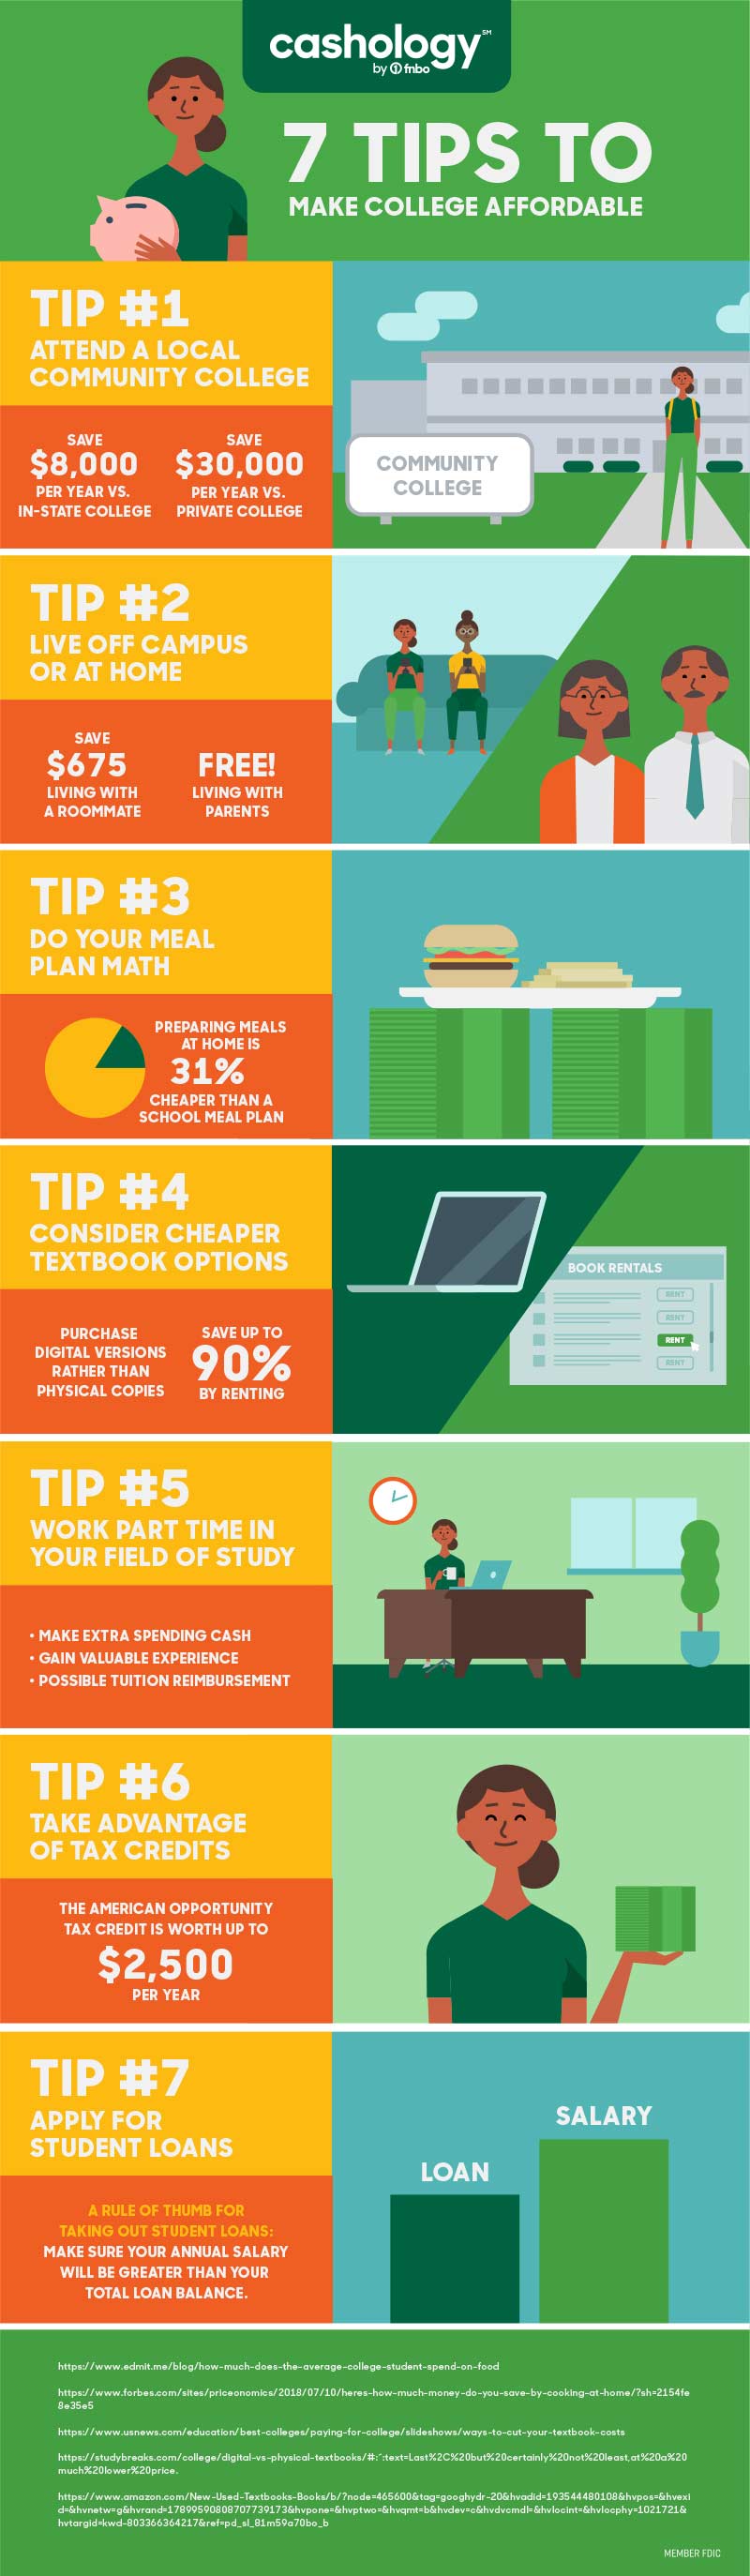 seven-tips-to-make-college-affordable-infographic-800.jpg